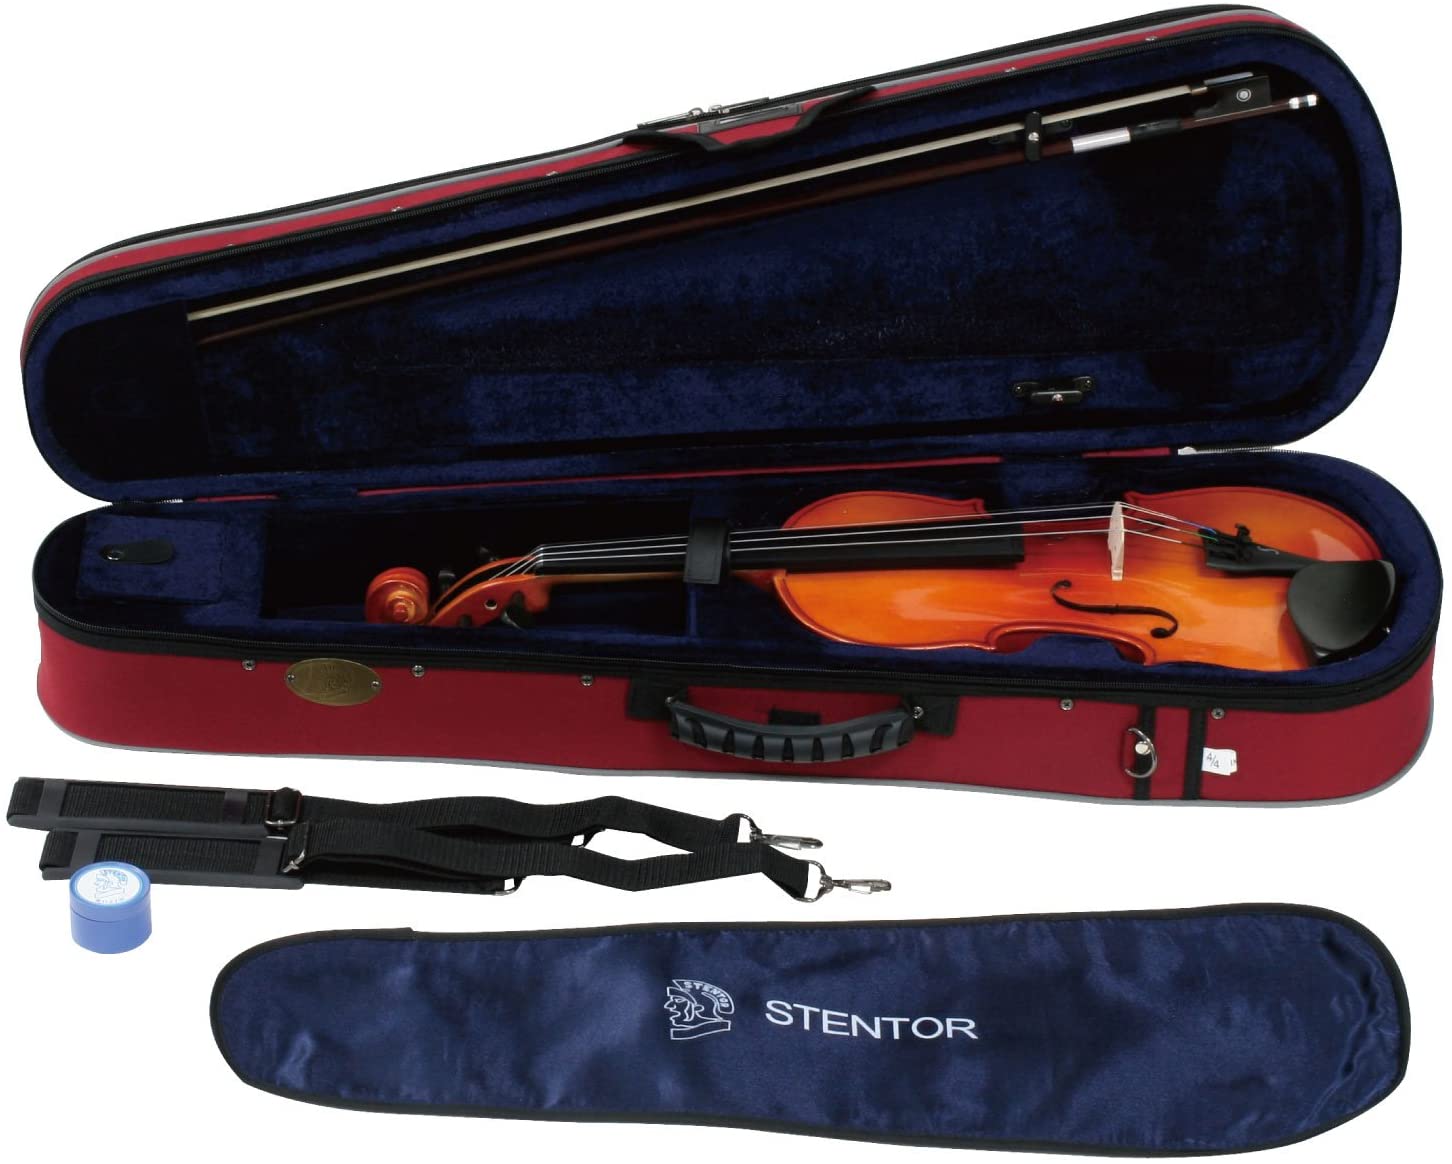 You are currently viewing Stentor 1500 Violin for Beginners